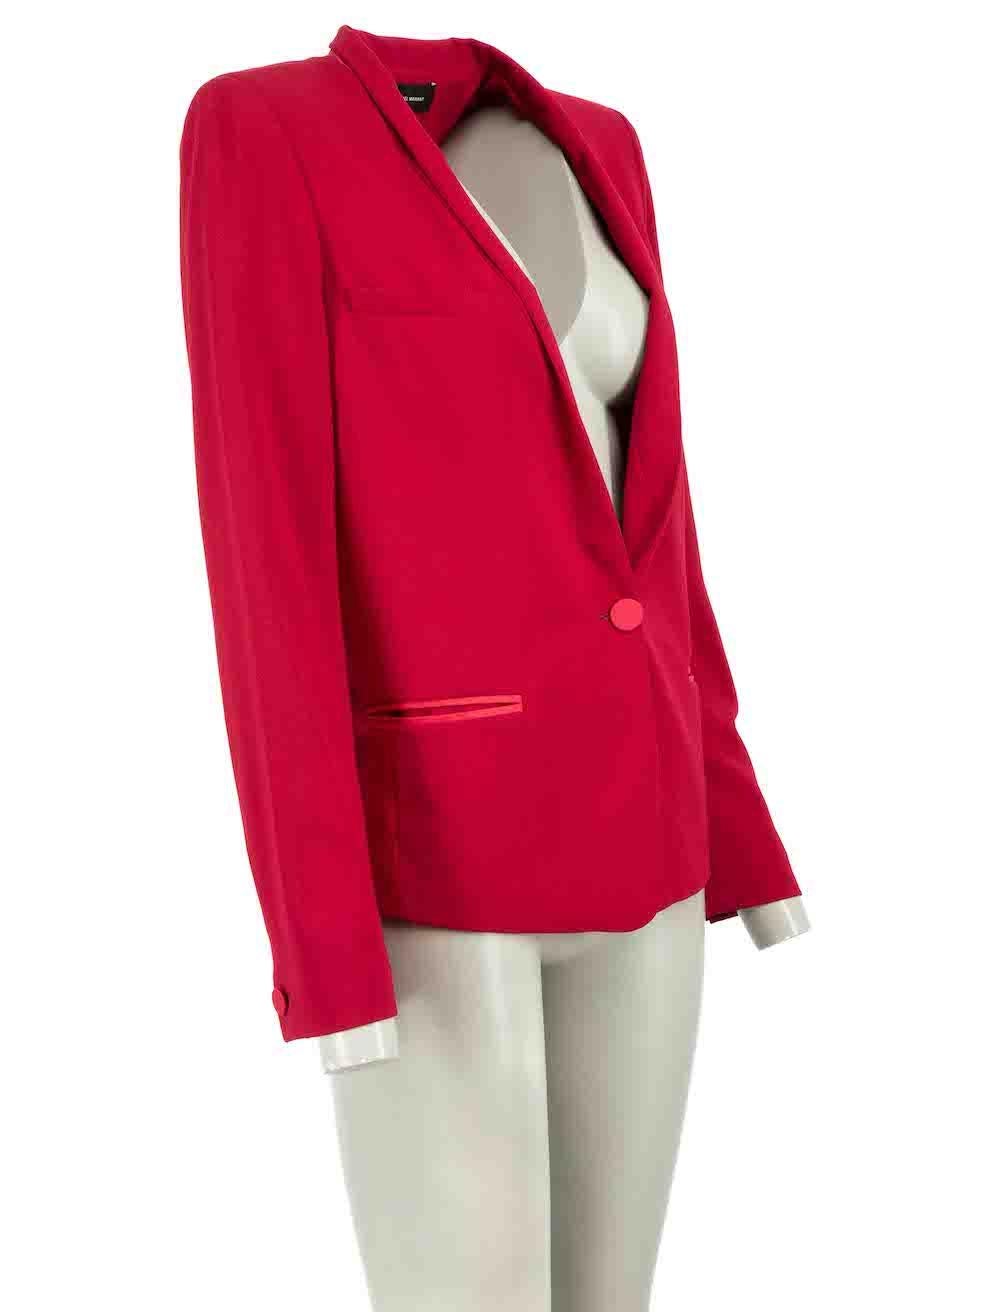 CONDITION is Very good. Minimal wear to blazer is evident. Minimal wear to fabric finish with a number of small plucks to the weave found throughout on this used Isabel Marant designer resale item.
 
Details
Red
Synthetic
Blazer
Button